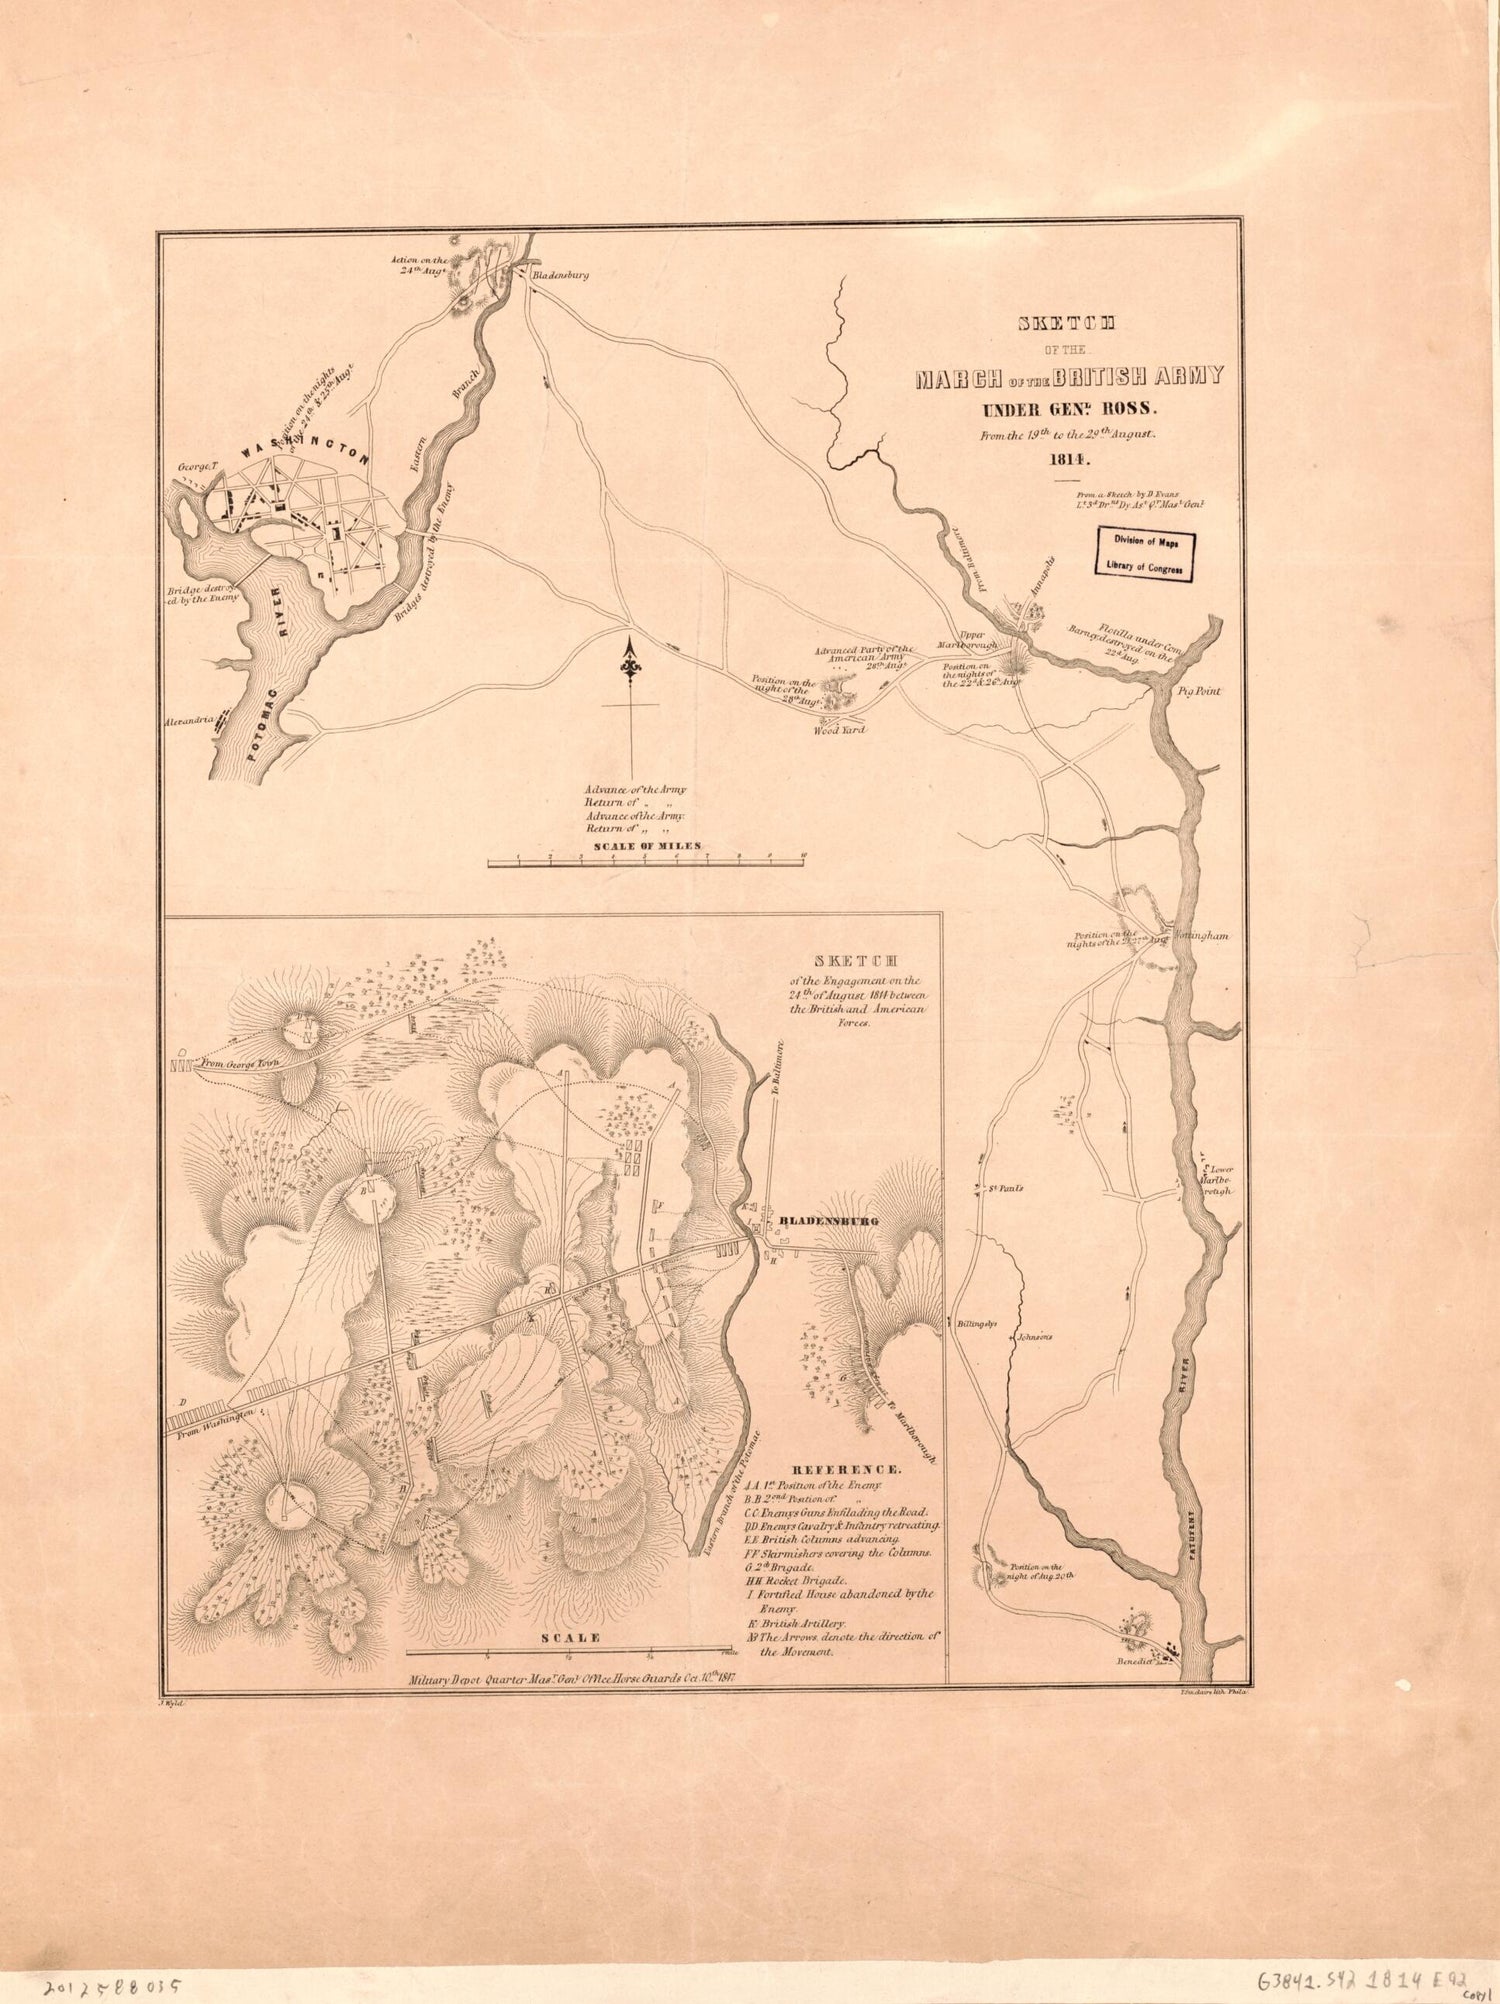 This old map of Sketch of the March of the British Army Under Gen&